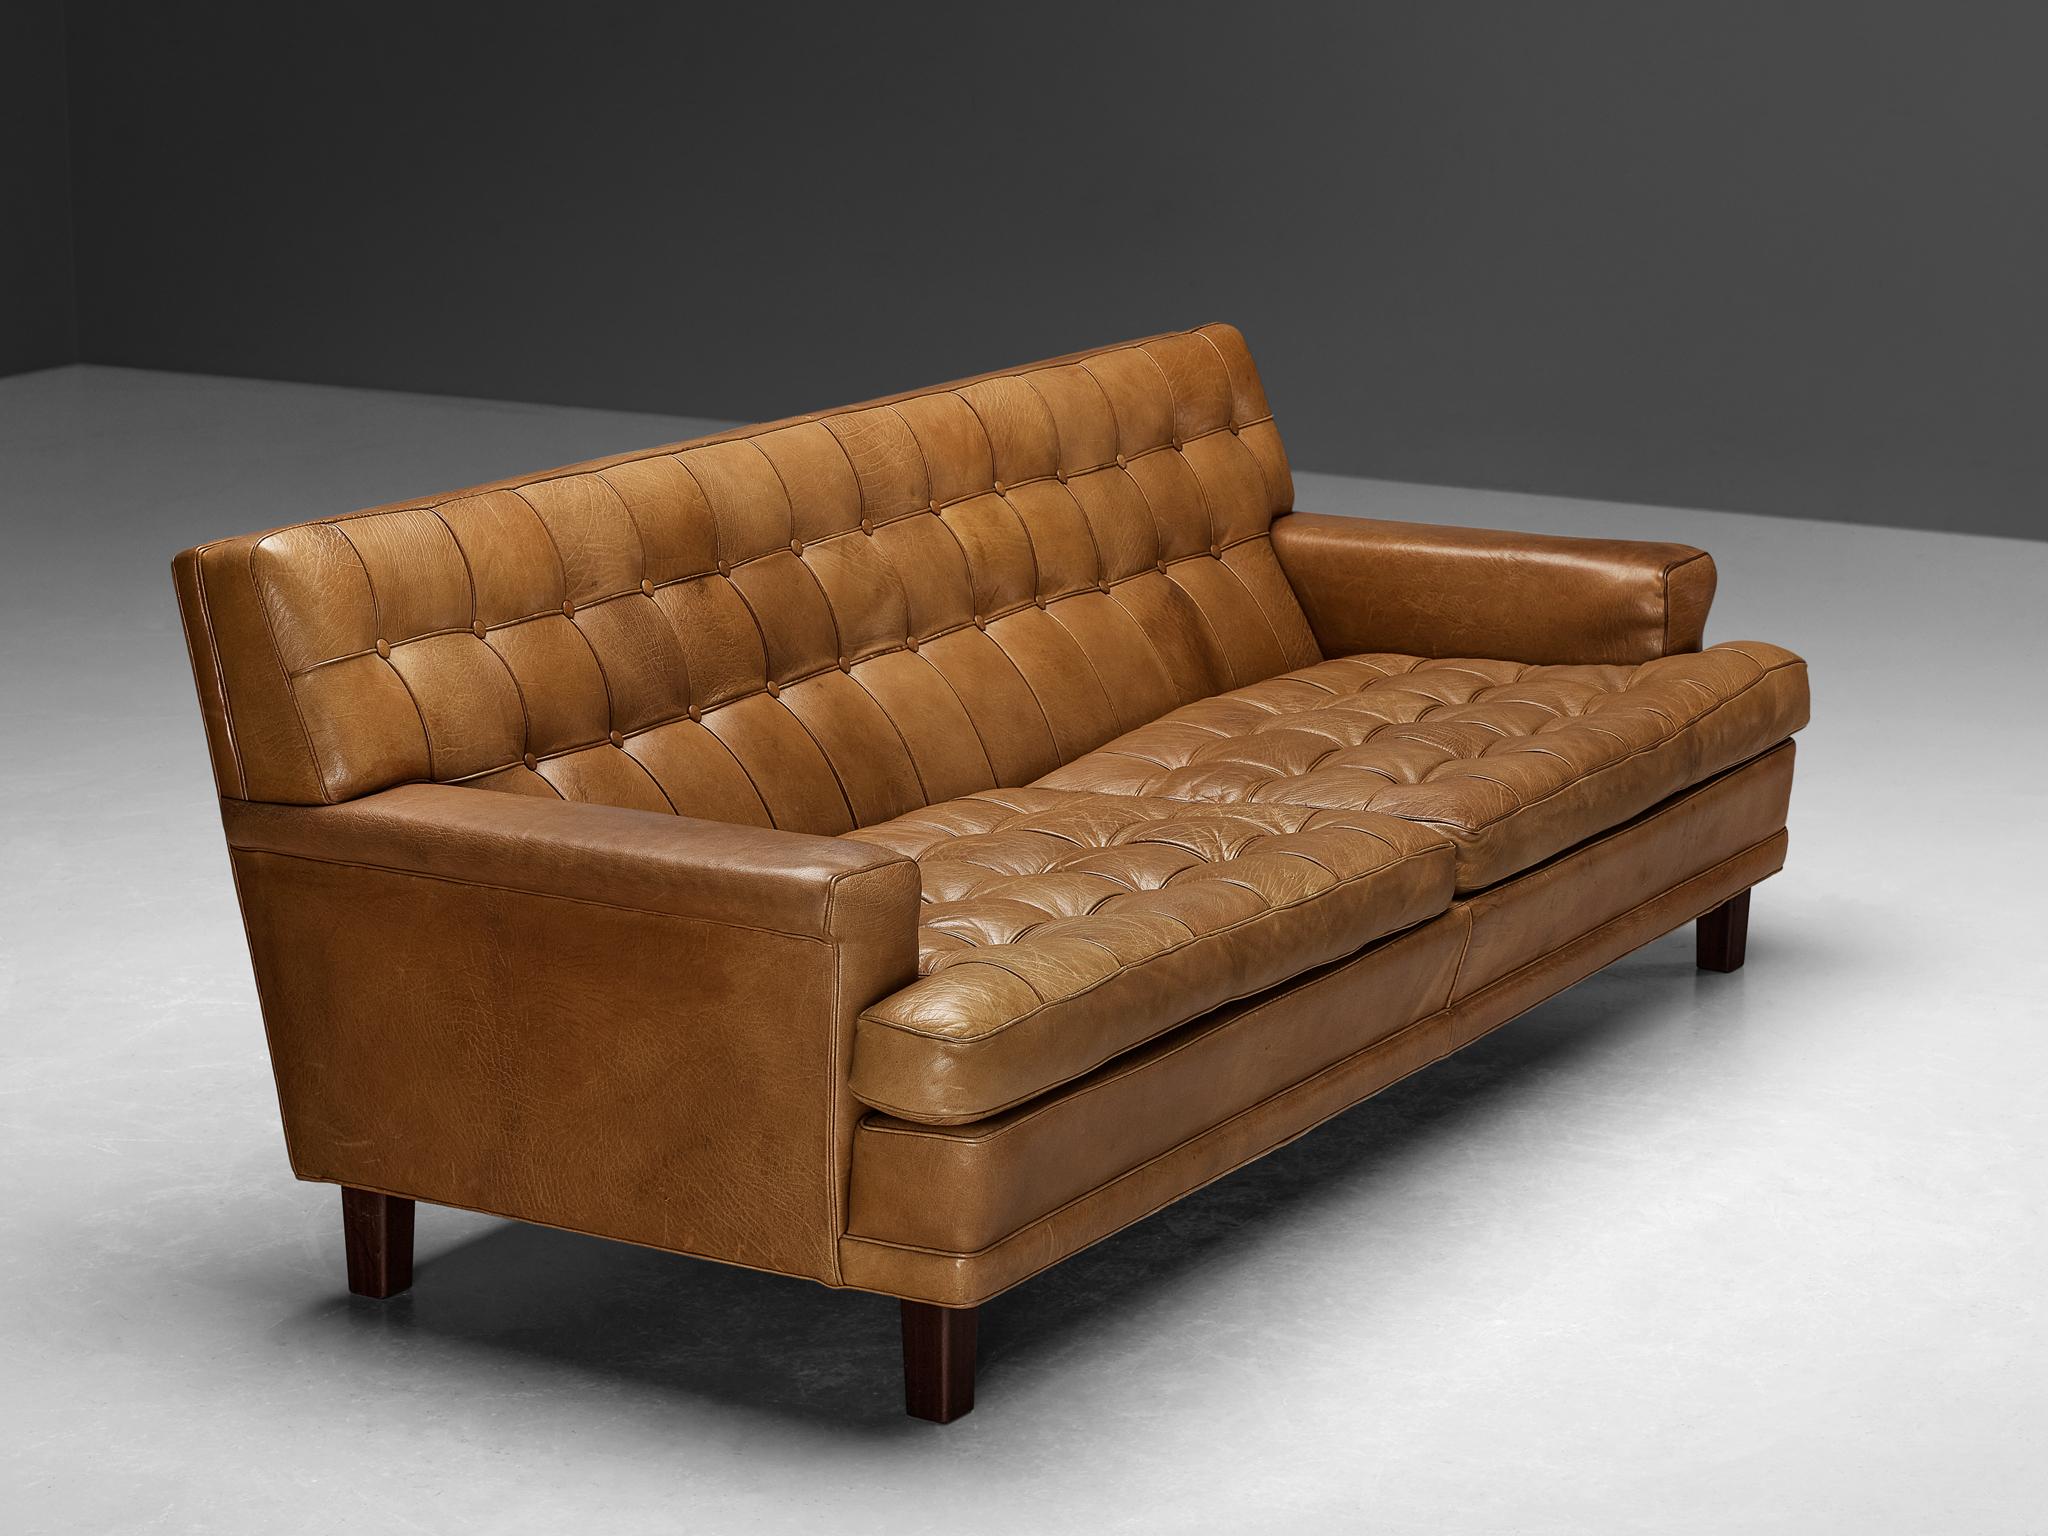 Arne Norell for Norell Möbel AB, sofa model 'Merkur', leather, mahogany, Sweden, 1960s 

This high-quality sofa called ‘Merkur’ is designed by the talented Swedish designer Arne Norell (1917-1971). Characteristic for this model is the notable space